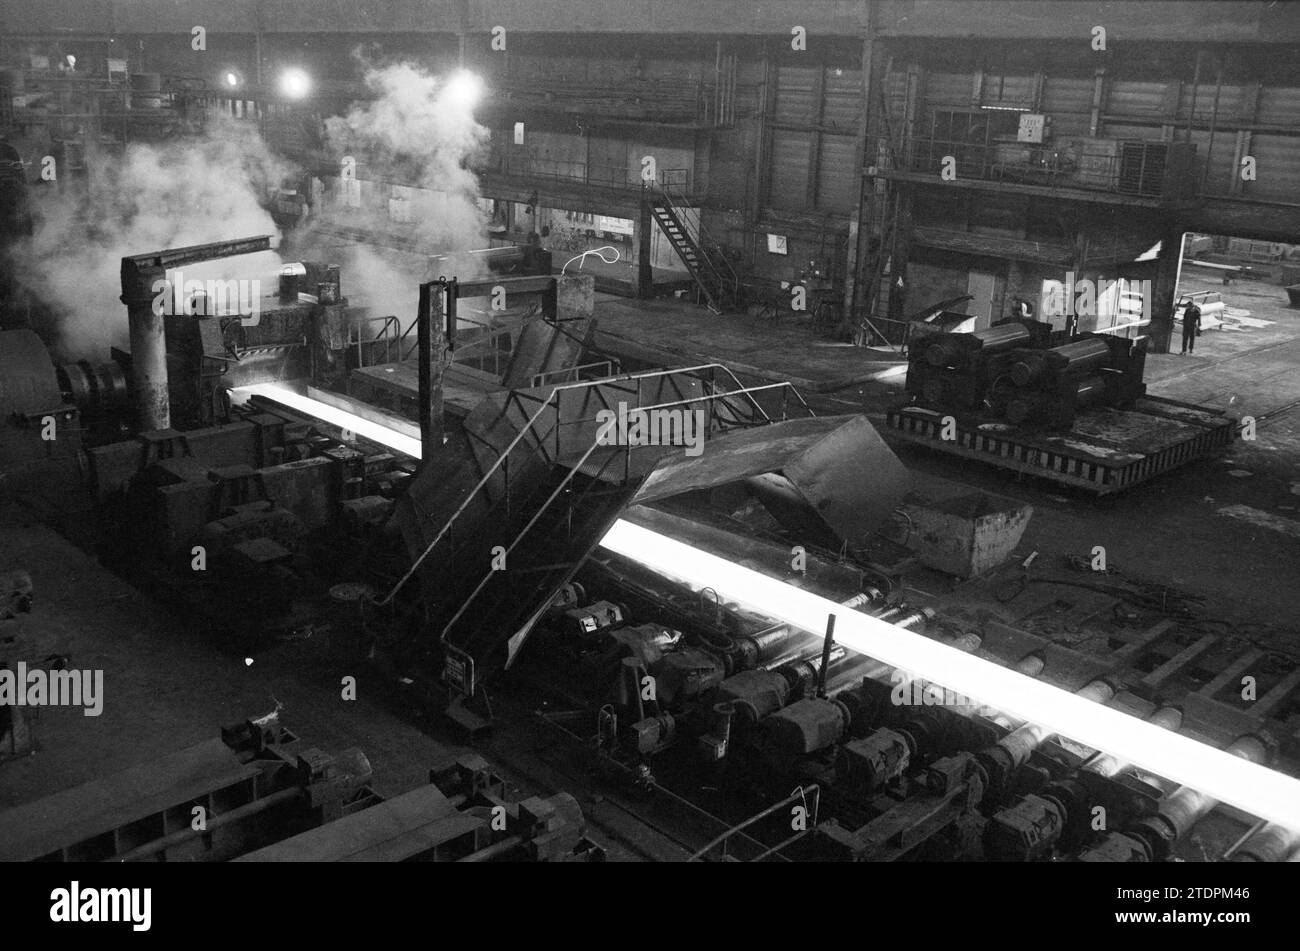 Casting machines, blast furnaces, 28-02-1983, Whizgle News from the Past, Tailored for the Future. Explore historical narratives, Dutch The Netherlands agency image with a modern perspective, bridging the gap between yesterday's events and tomorrow's insights. A timeless journey shaping the stories that shape our future Stock Photo